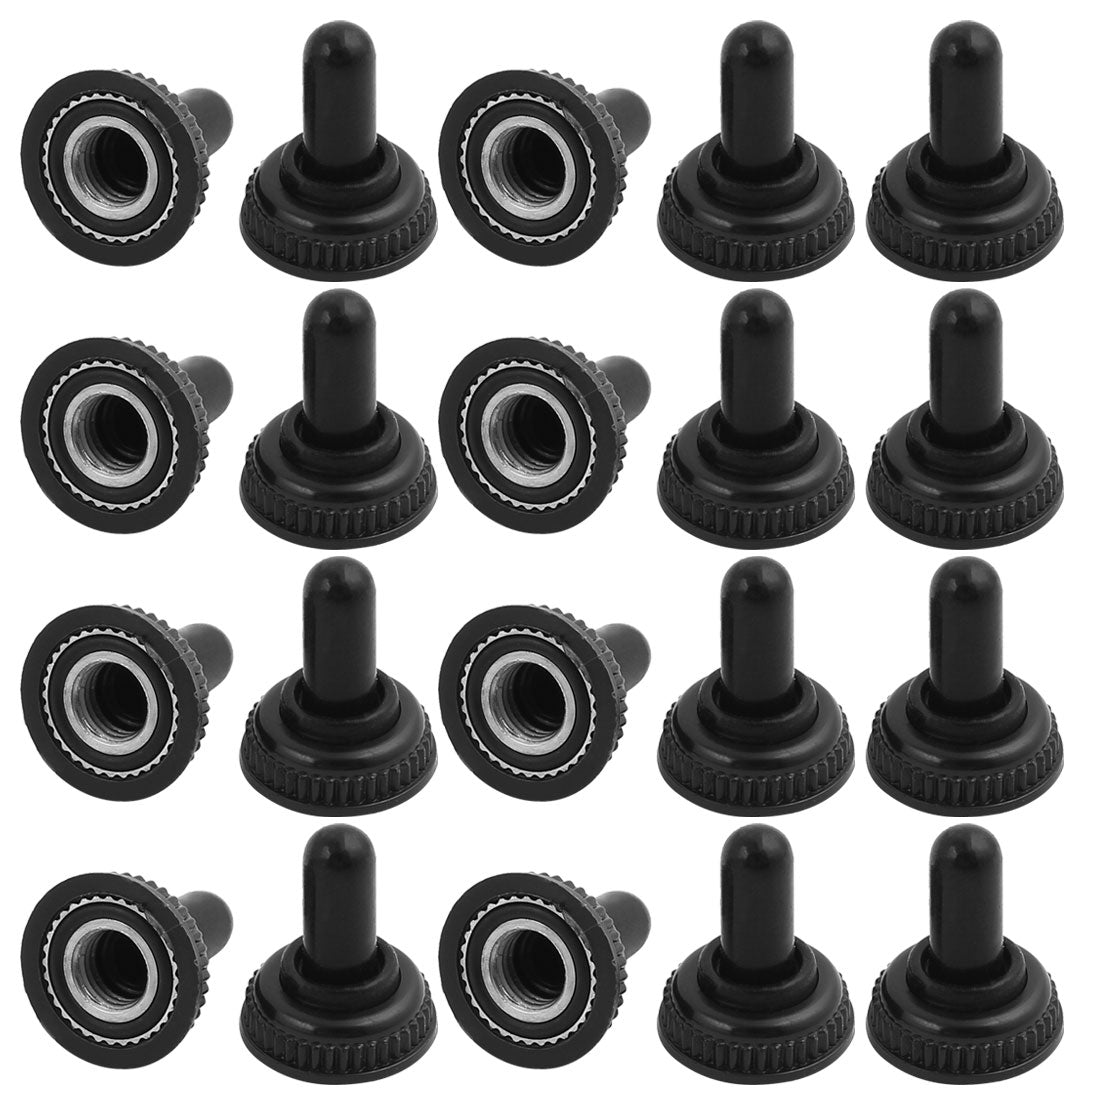 uxcell Uxcell 20Pcs Mini 6mm Thread Toggle Switch Waterproof Rubber Cover Cap Boot Black